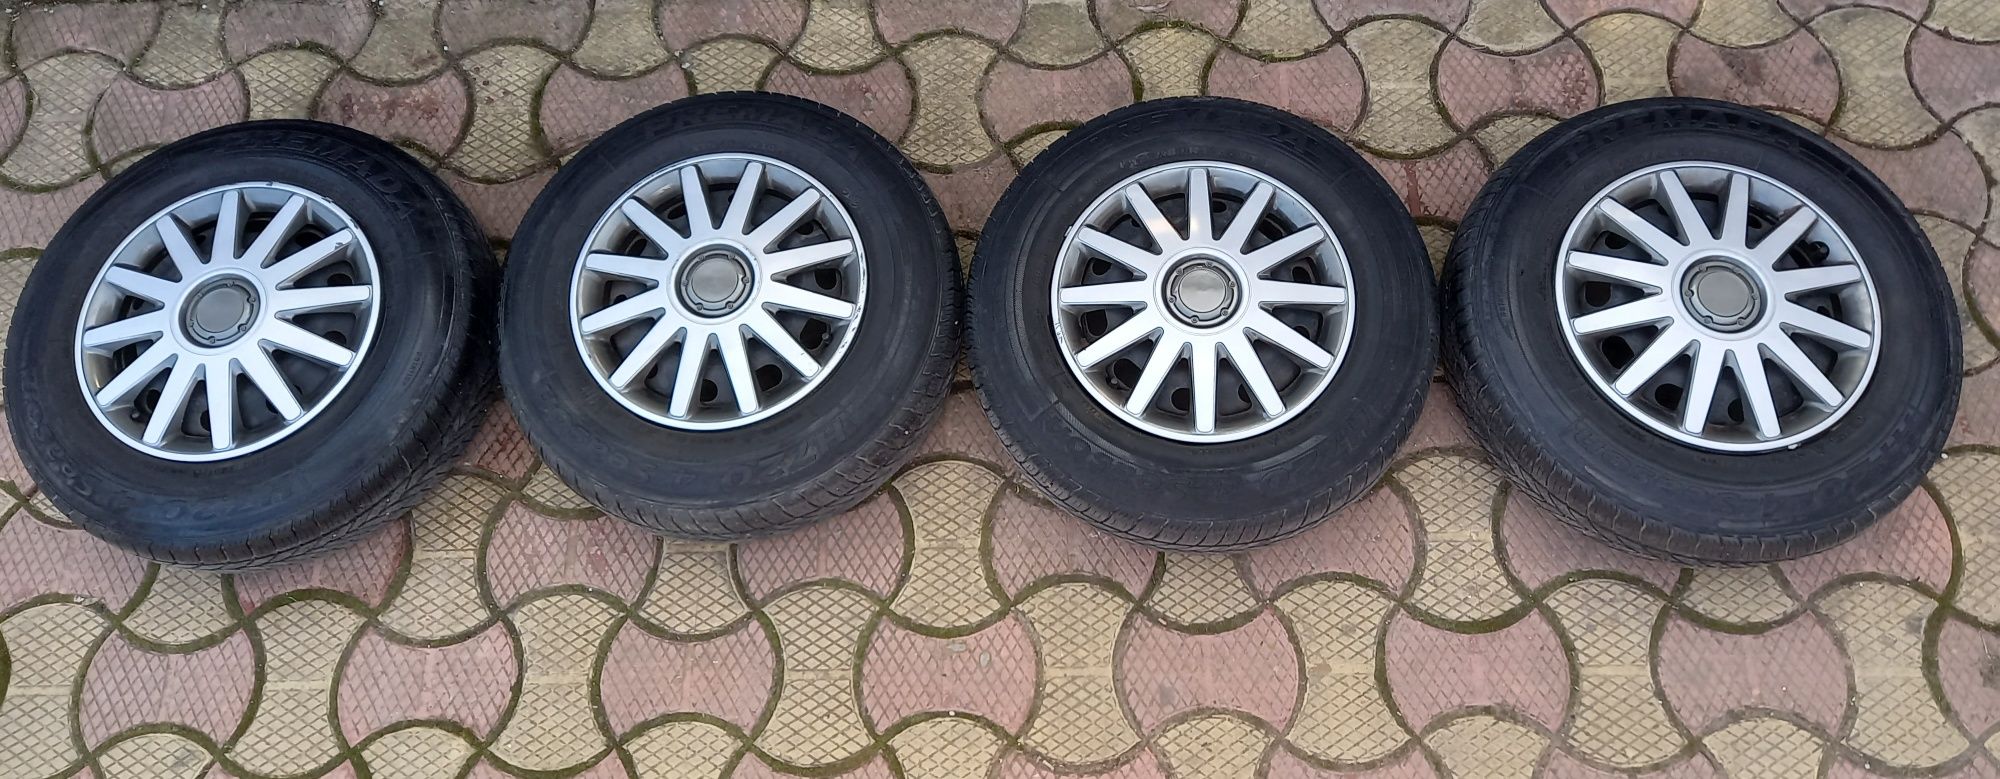 Vând 4 jante otel VW, 14 inch. + 4 Anvelope M+S 175/80 R14 + Capace